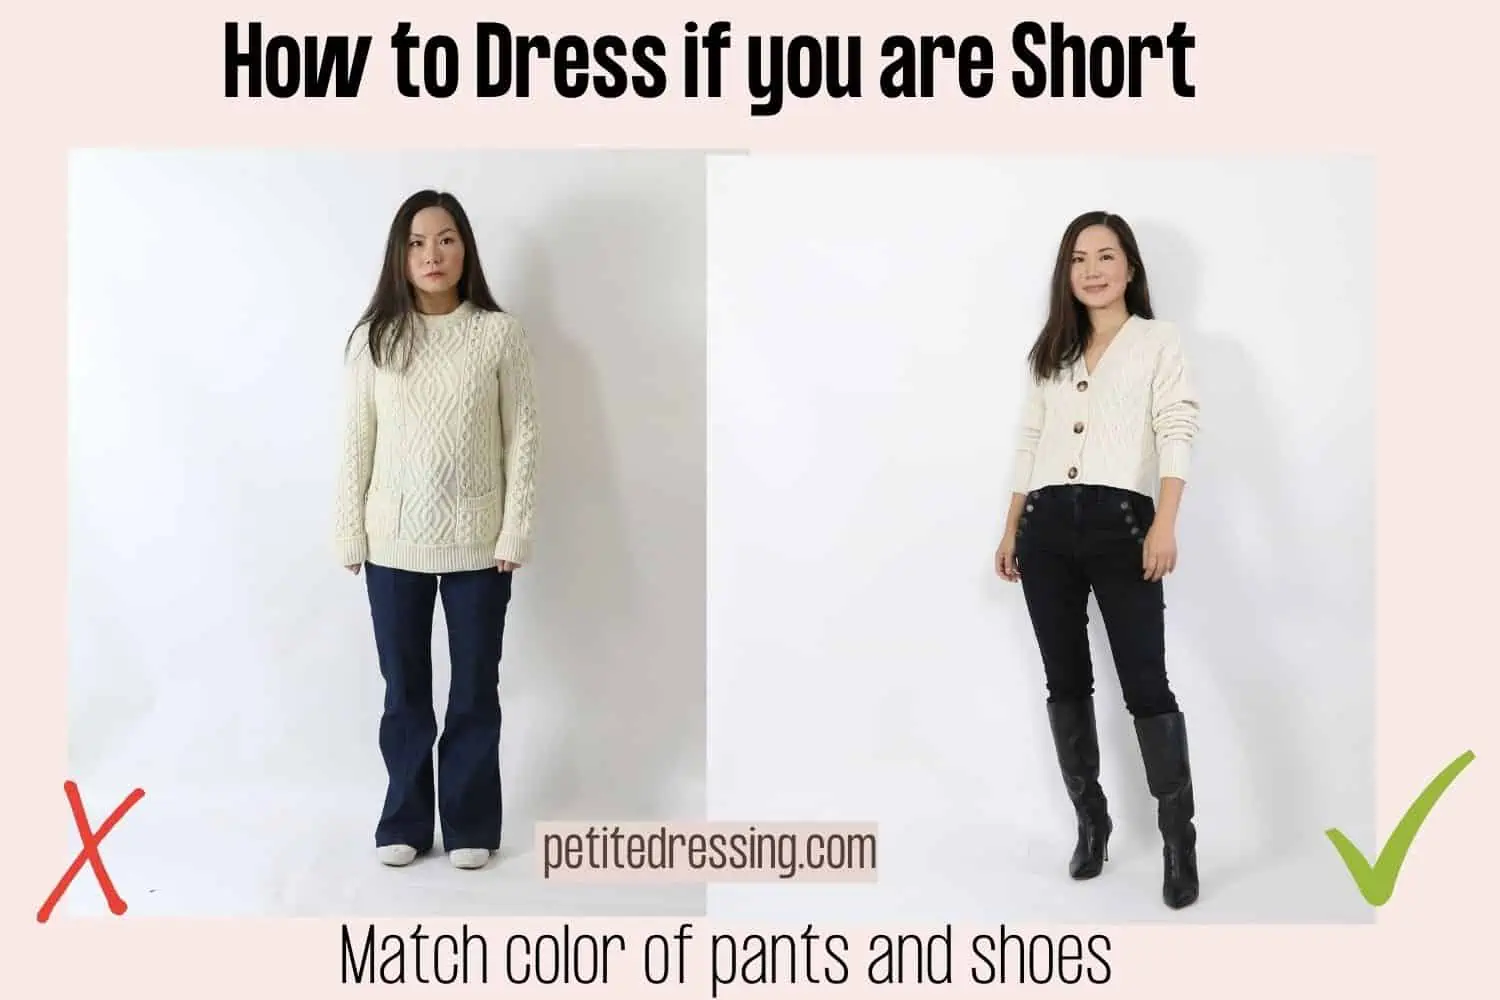 How to wear tunics or short dresses with pants